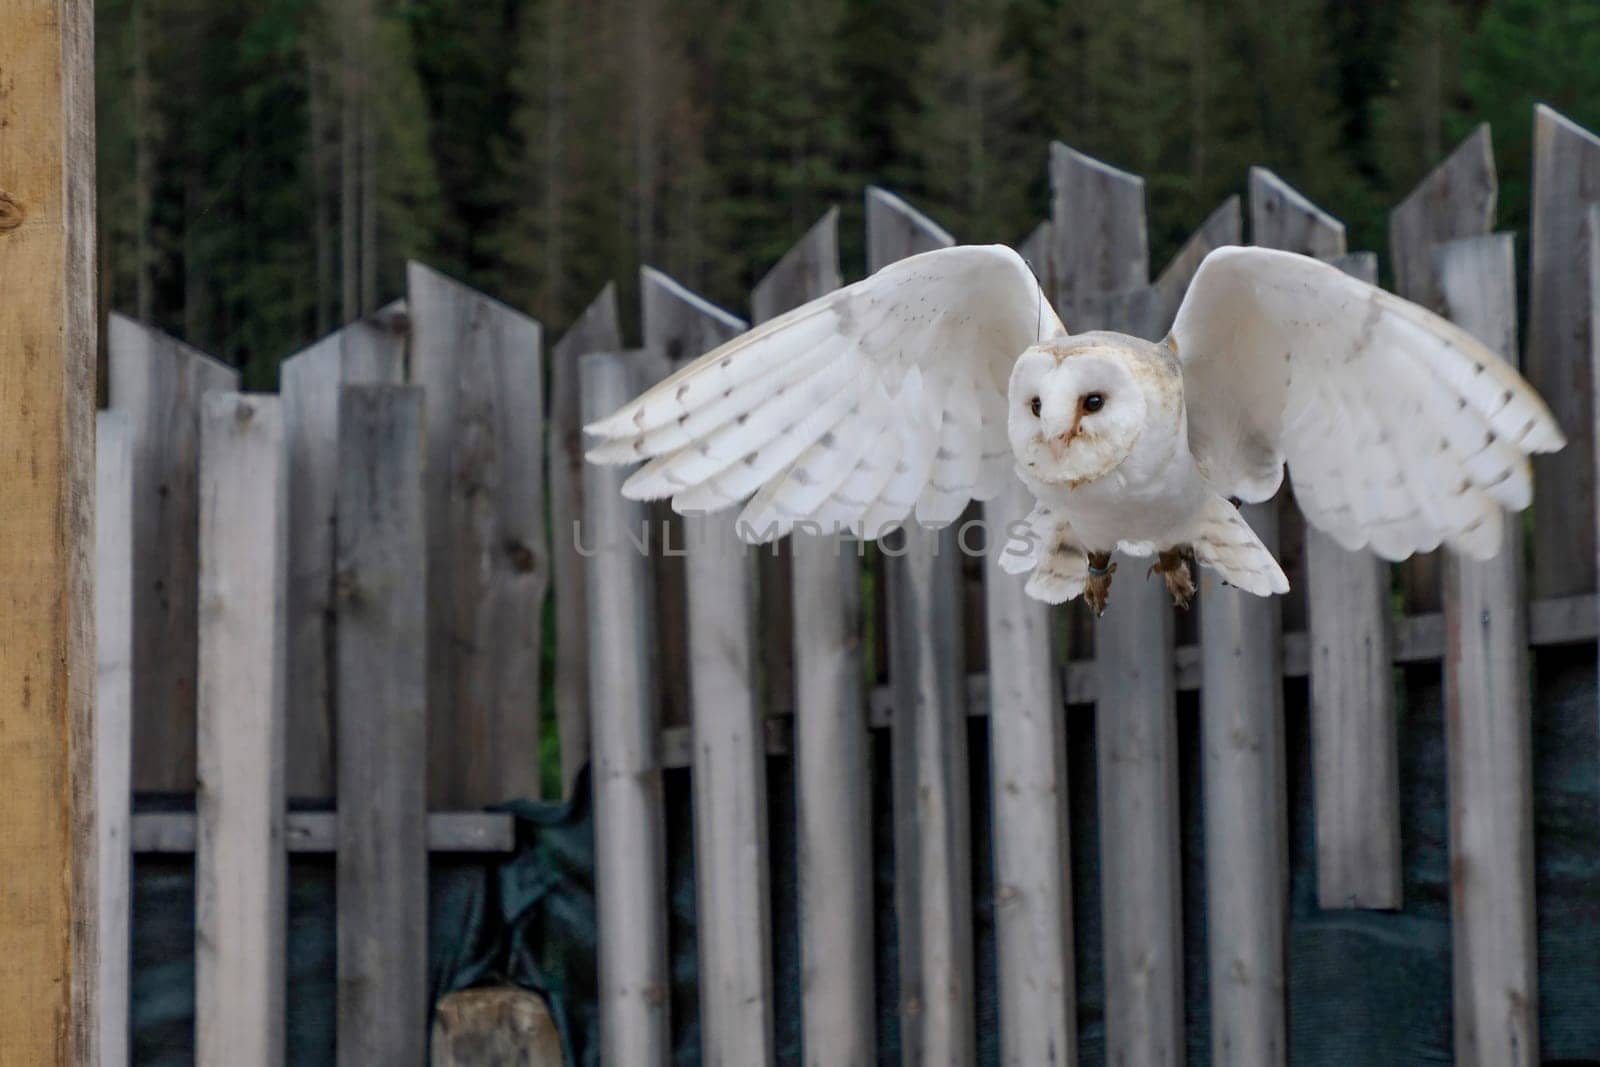 A common barn owl Tyto albahead flying in a falconry birds of prey reproduction center